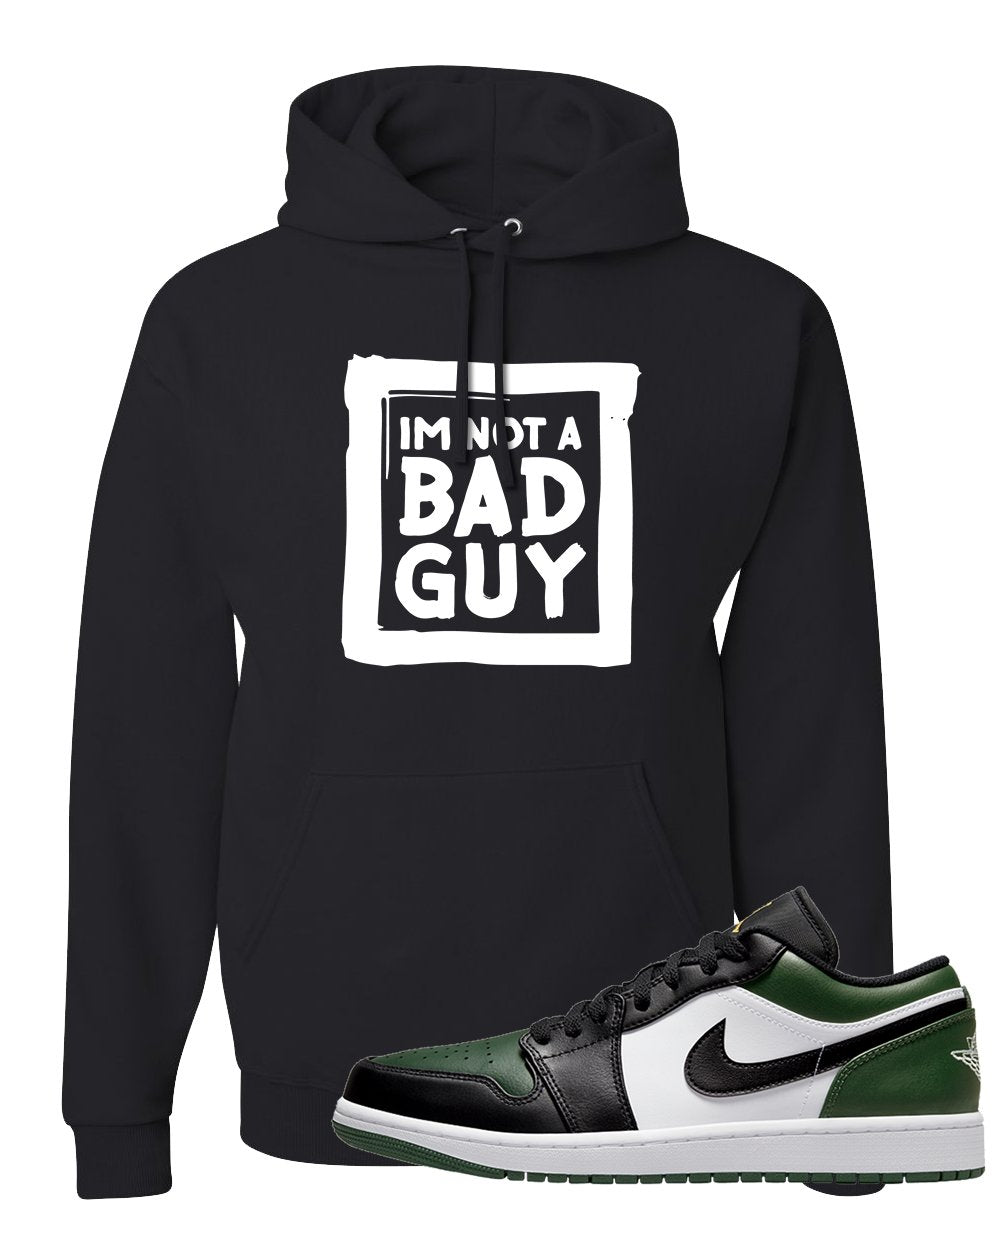 Green Toe Low 1s Hoodie | I'm Not A Bad Guy, Black